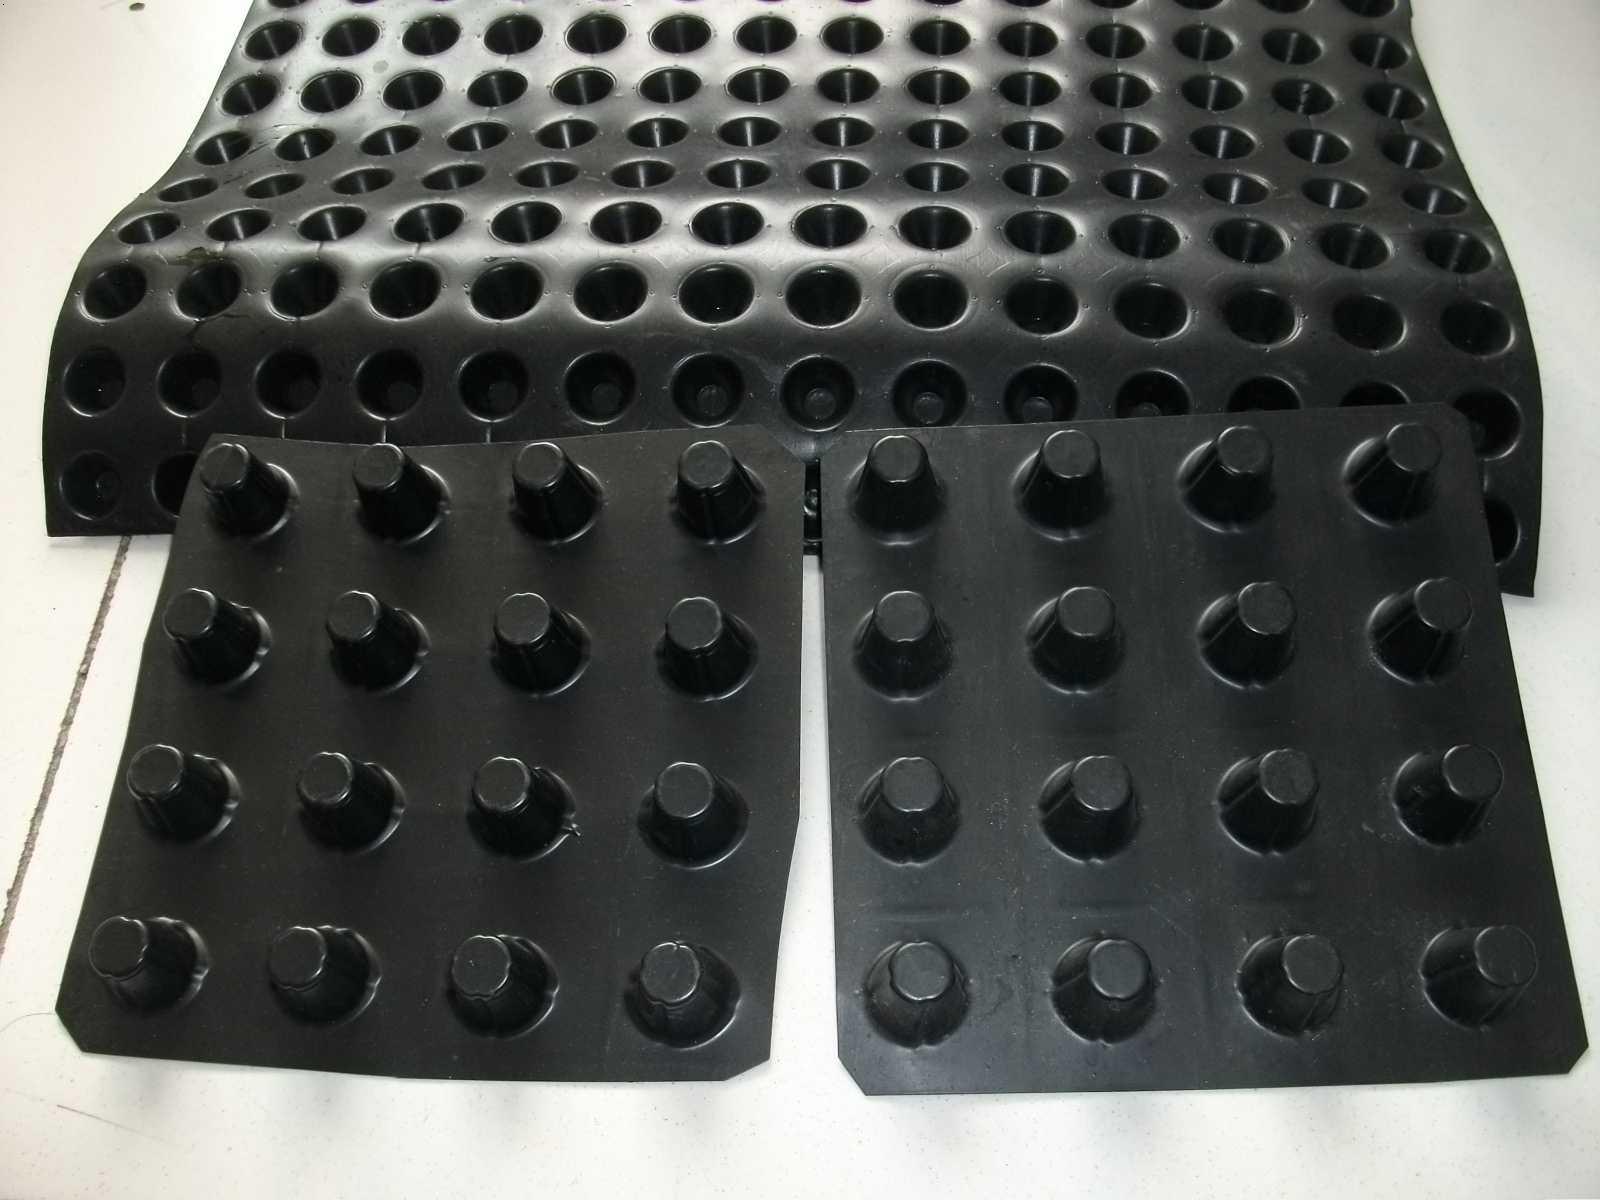 Polyethylene Drainage Board for Roof Water Draining